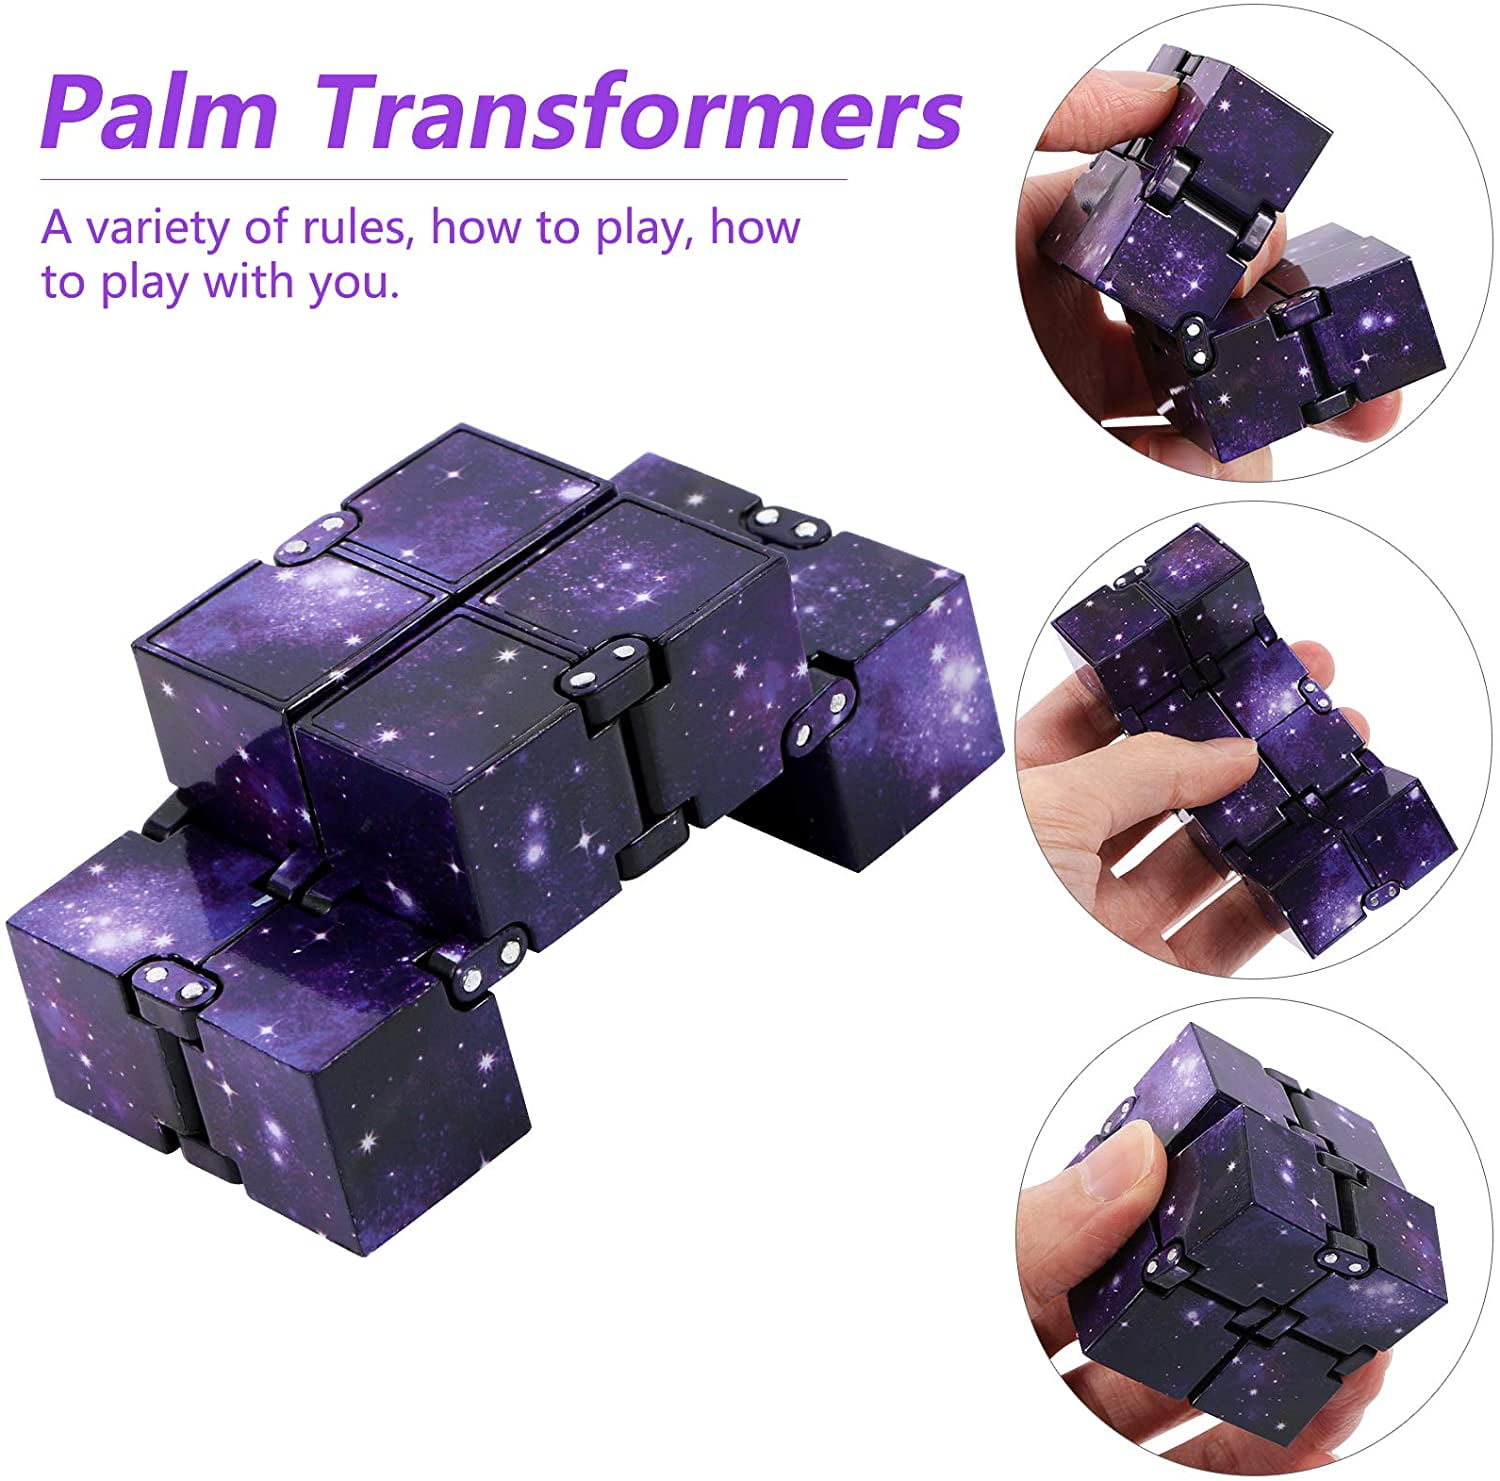 INFINITY CUBE Fidget Cube Toy 2021 New Mini Hand Held Fidget Stress Anxiety Relief Galaxy Purple for Adults Kids ADD ADHD Good Gift Killing Time and Fun Magic 